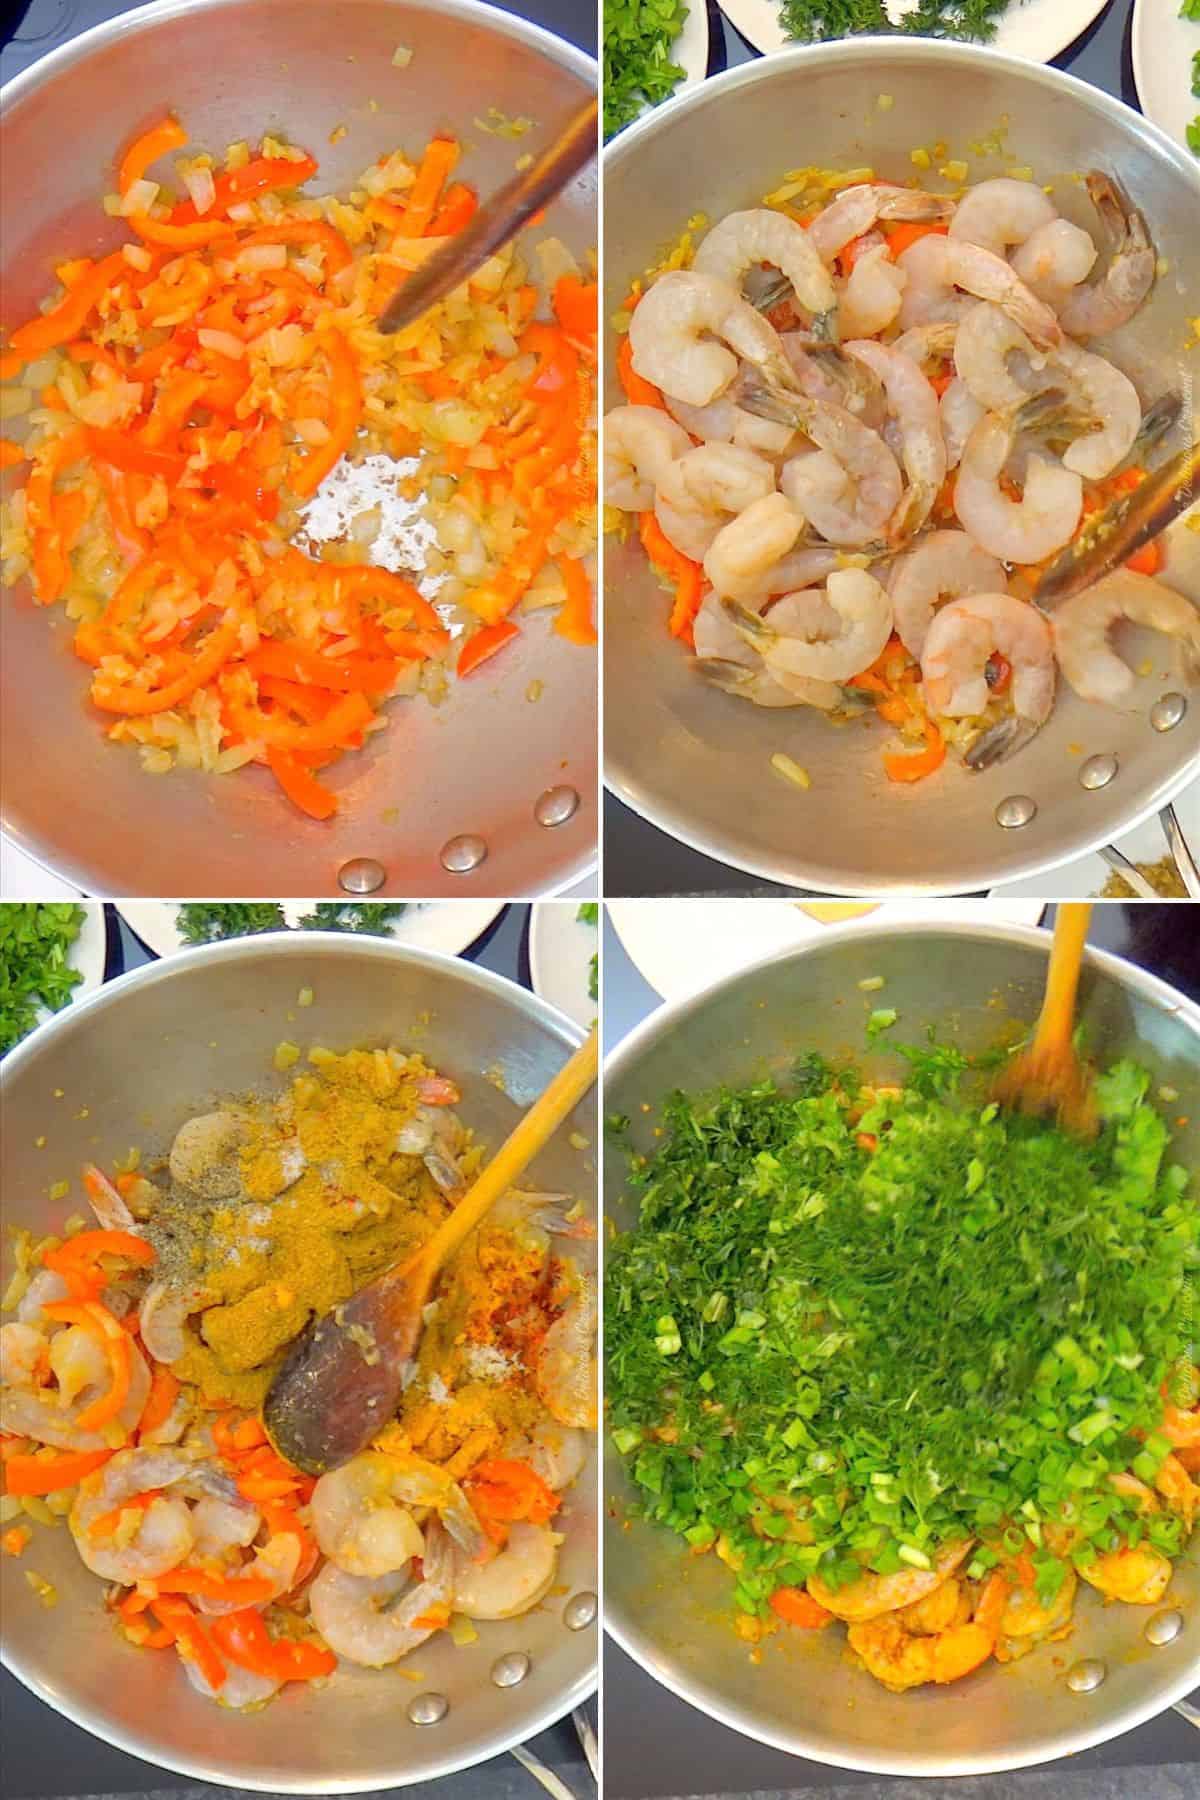 Cooking shrimp with vegetables and herbs.